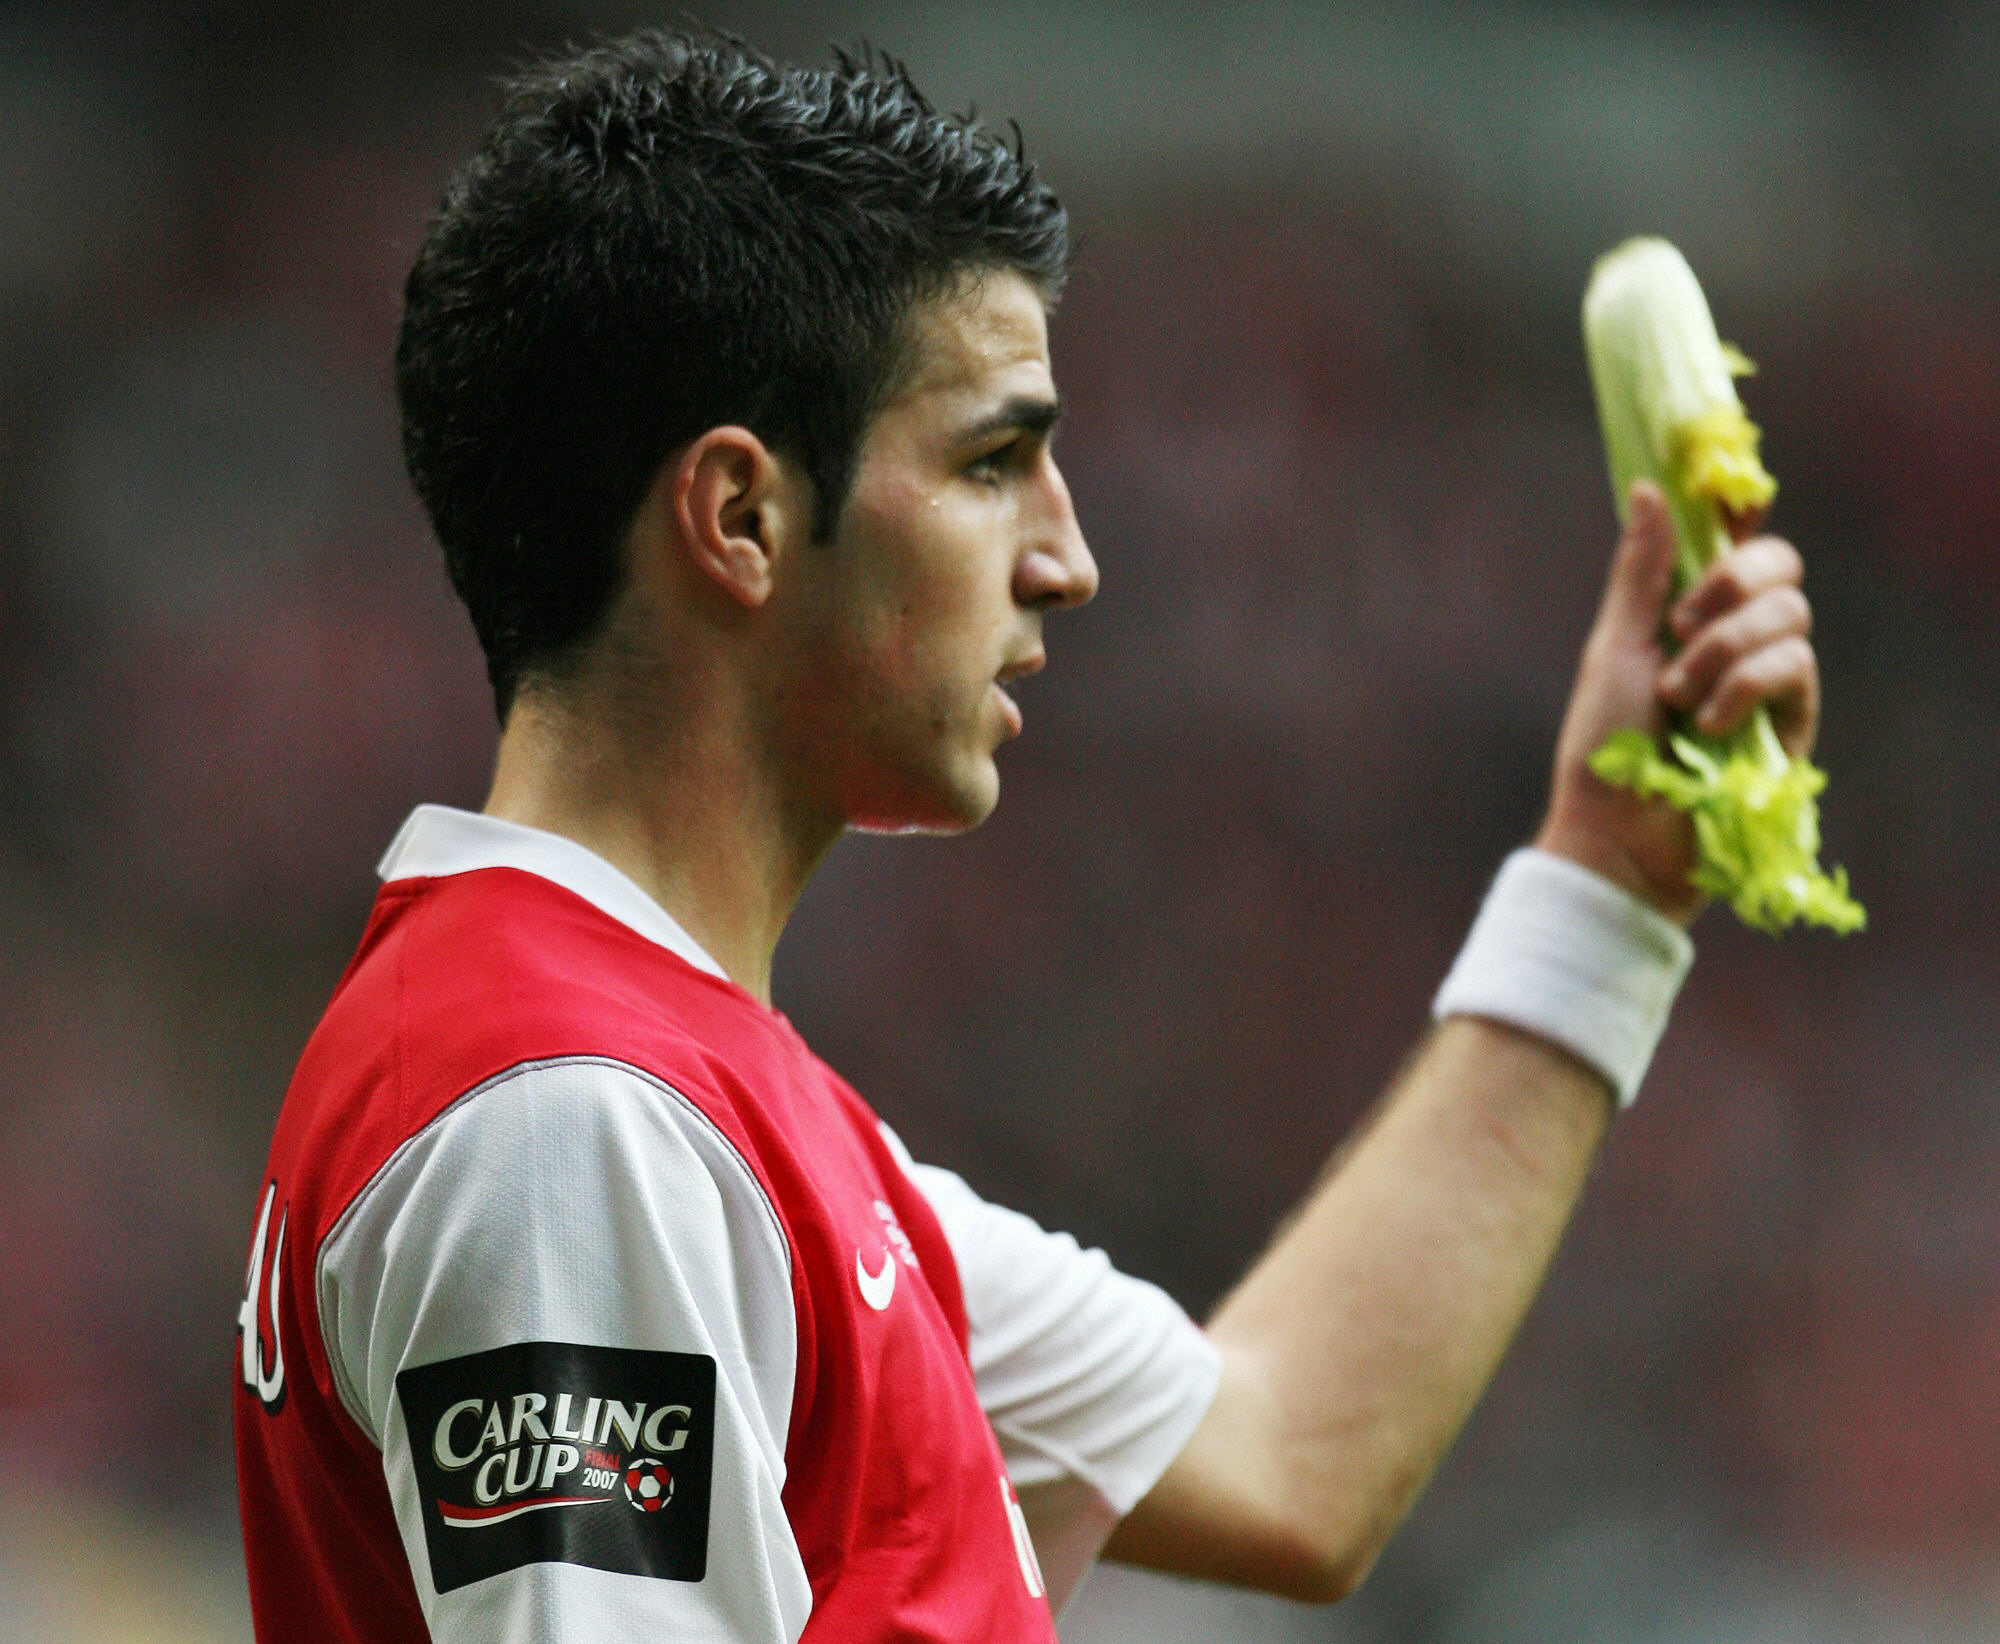 Then-Arsenal star Cesc Fabregas could barely believe what he had been attacked with in 2007